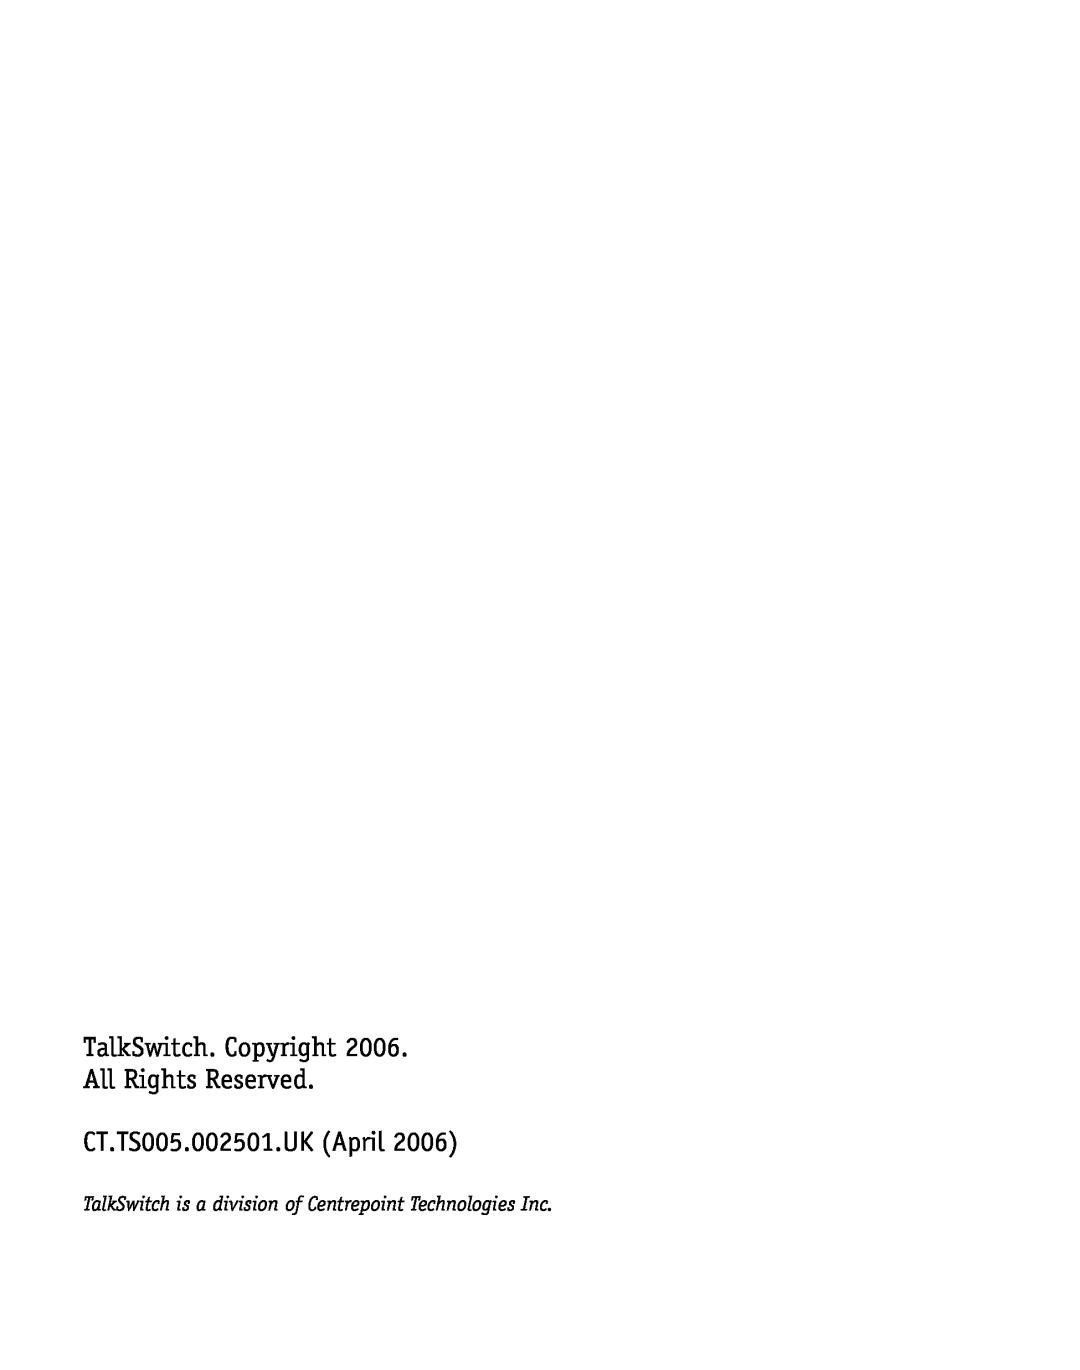 Talkswitch manual TalkSwitch is a division of Centrepoint Technologies Inc, CT.TS005.002501.UK April 